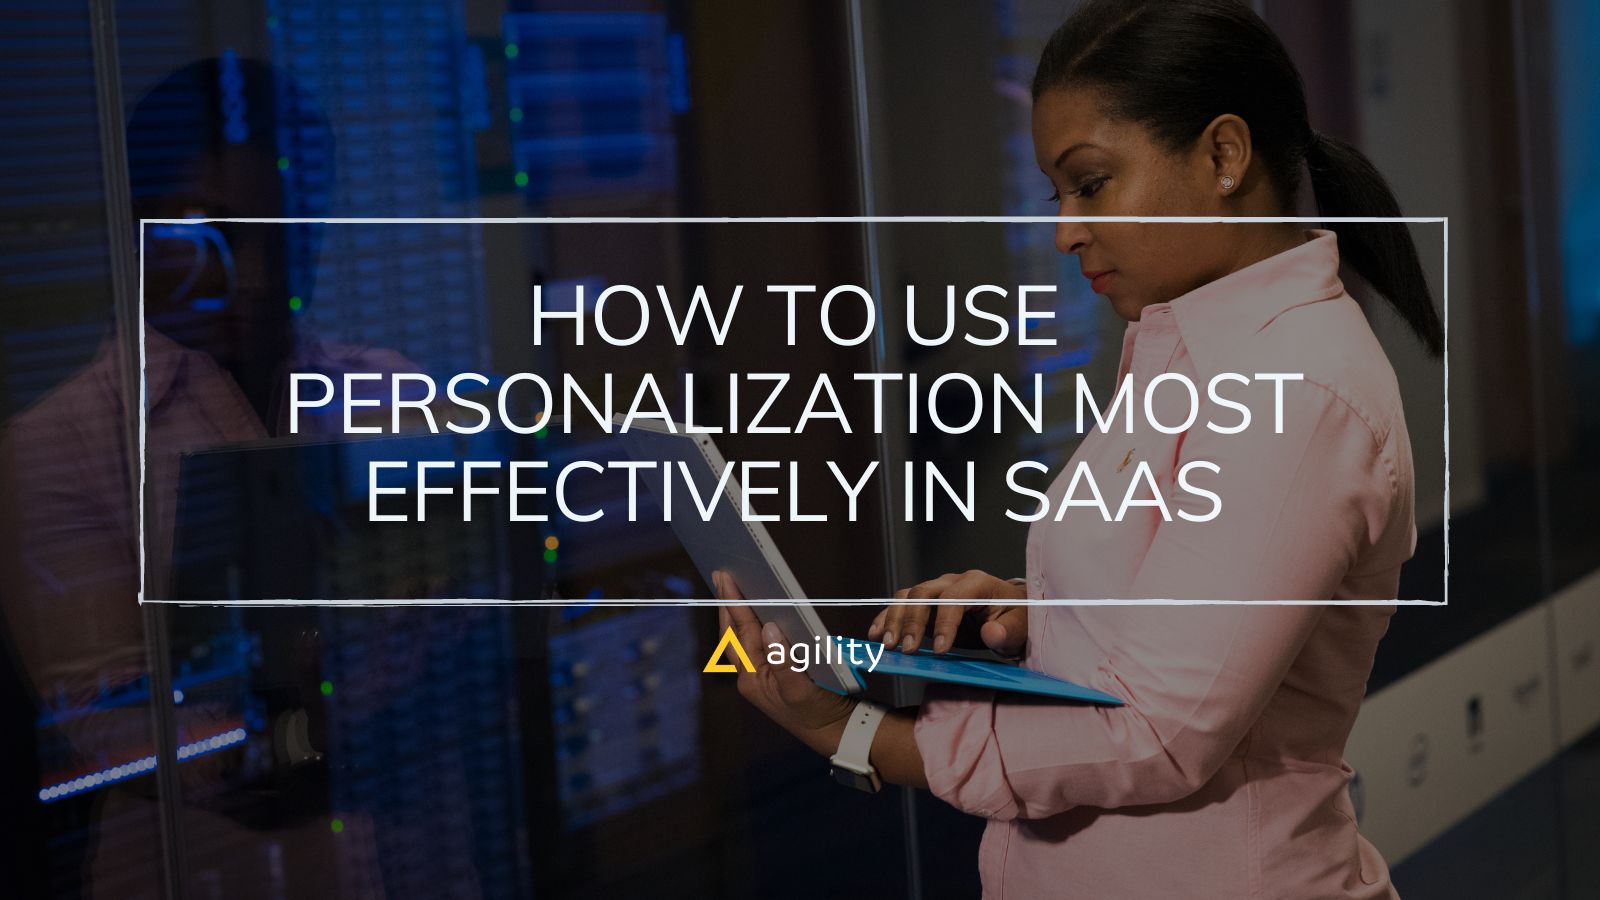 How to Use Personalization Most Effectively in SaaS